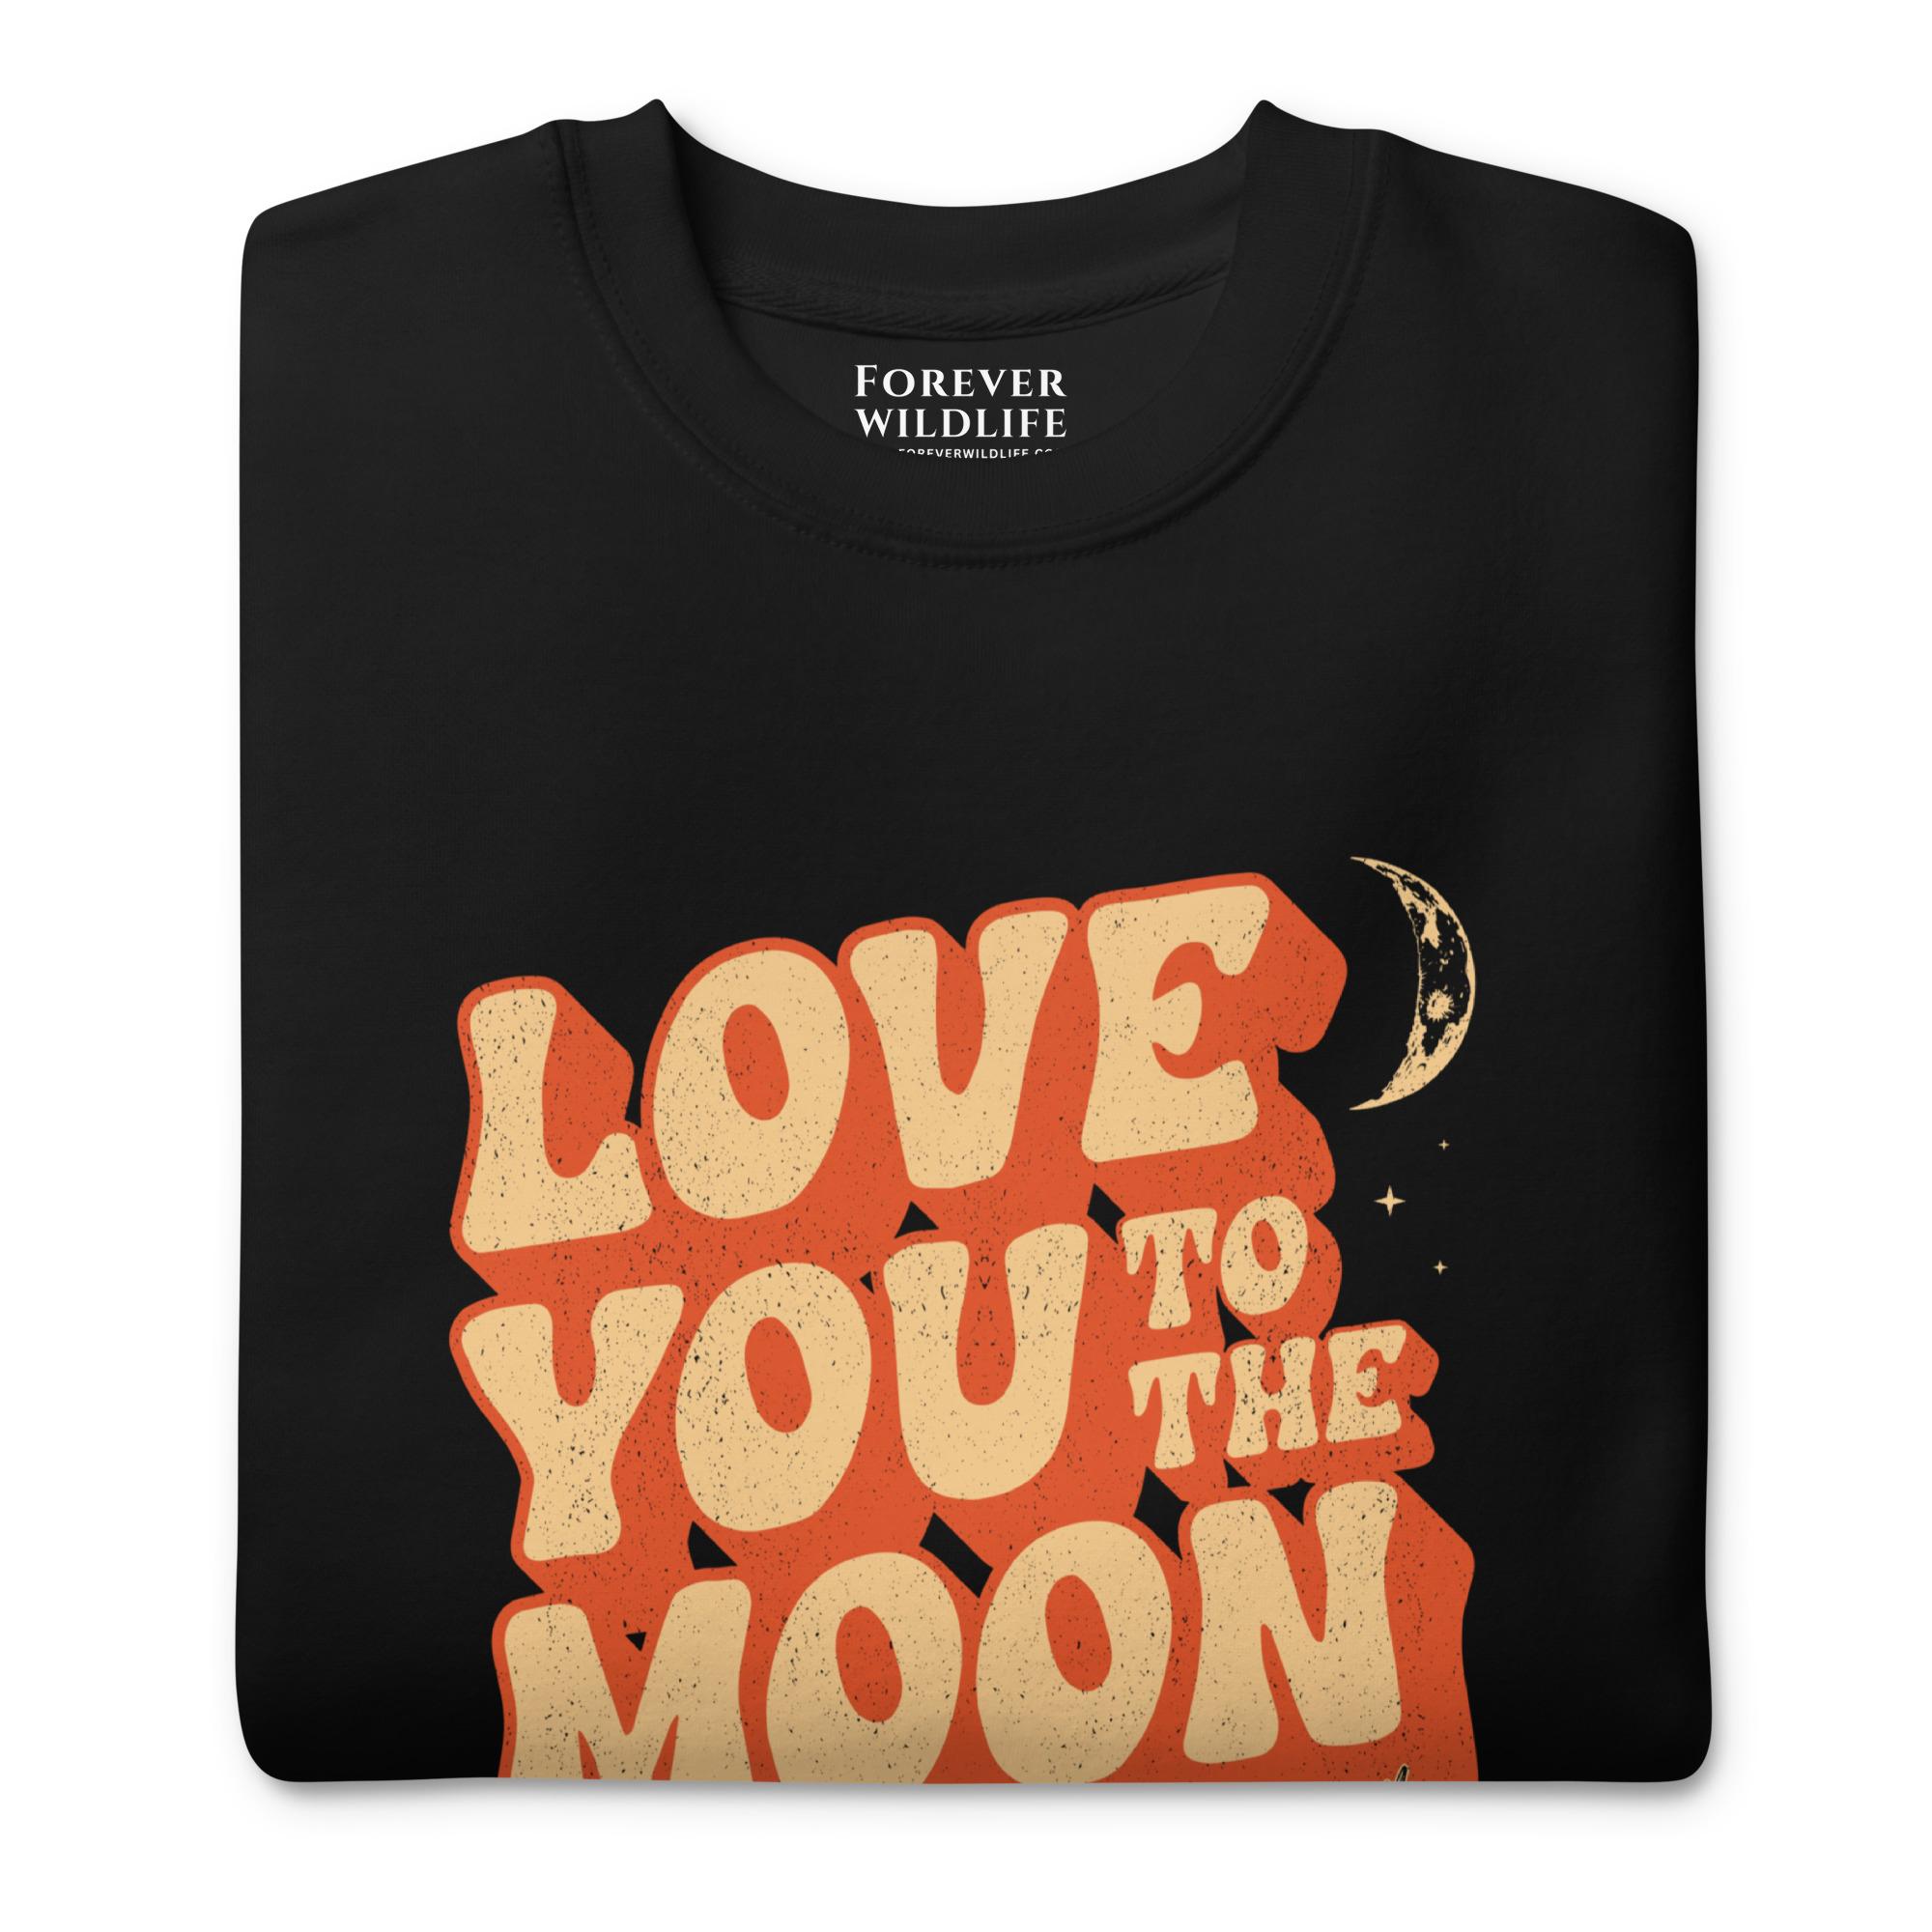 Eagle Sweatshirt in Black-Premium Wildlife Animal Inspiration Sweatshirt Design with 'Love You To The Moon' text, part of Wildlife Sweatshirts & Clothing from Forever Wildlife.